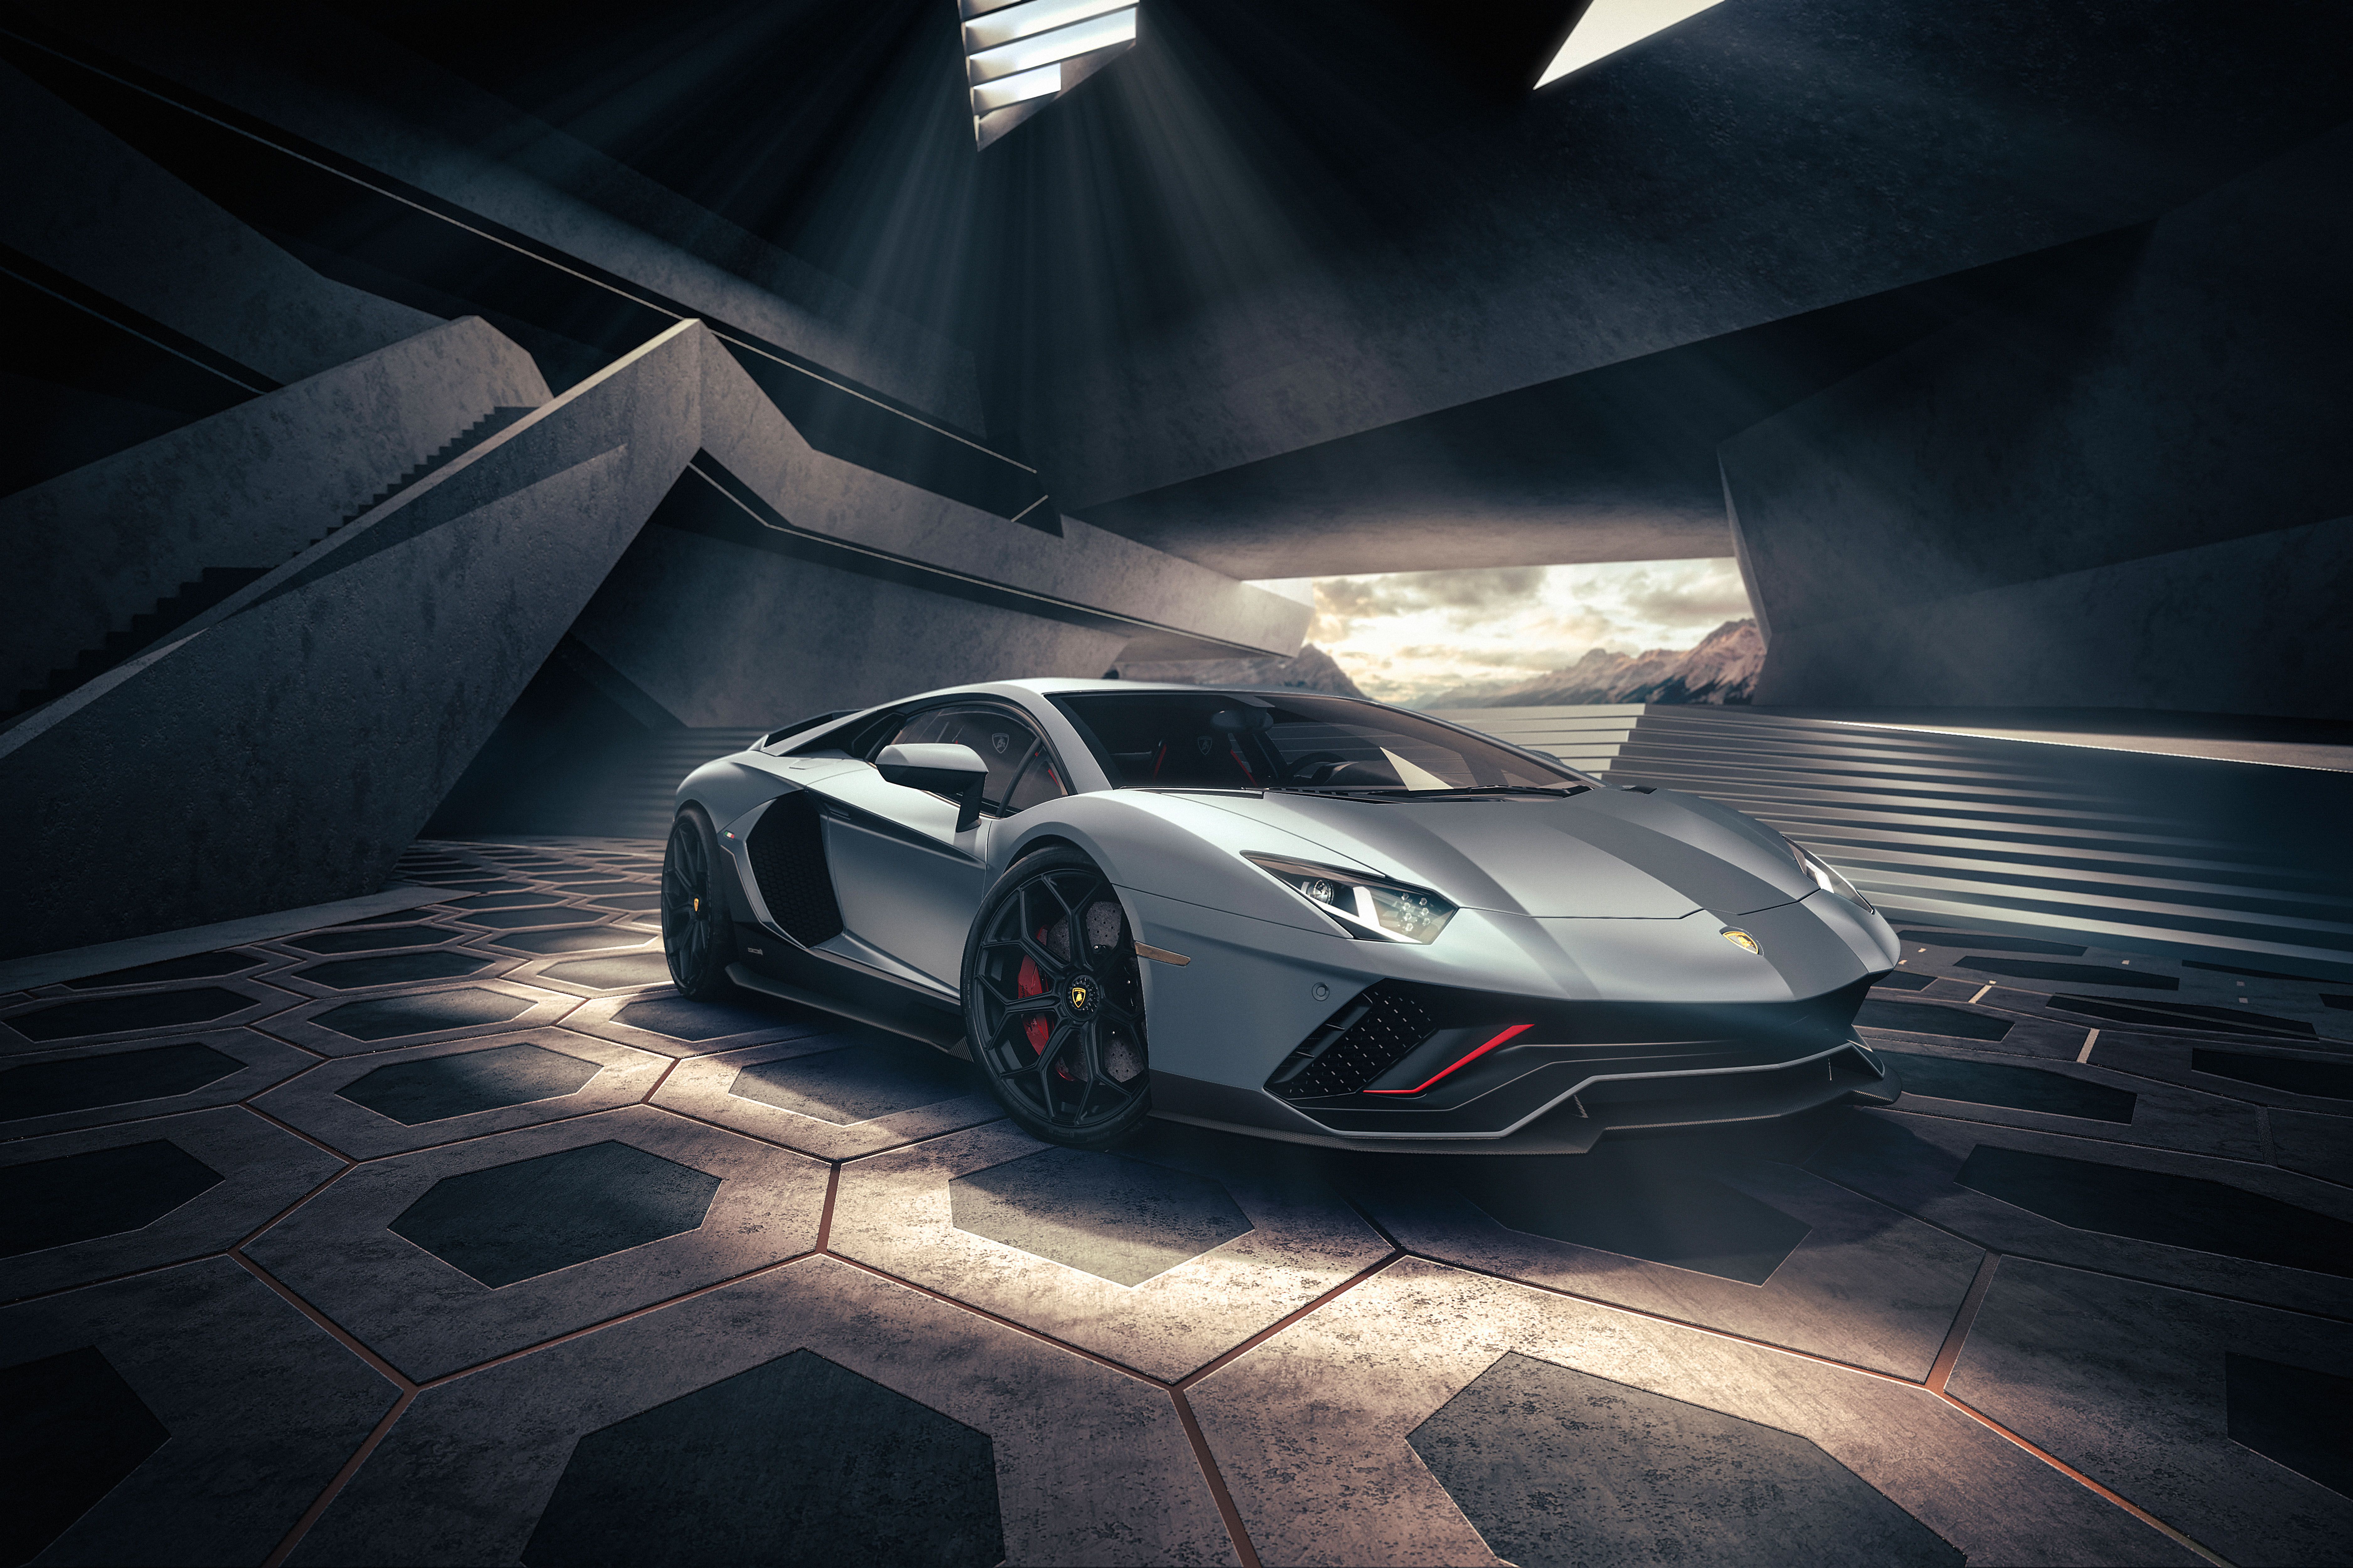 Lamborghini Cars and SUVs: Reviews, Pricing, and Specs